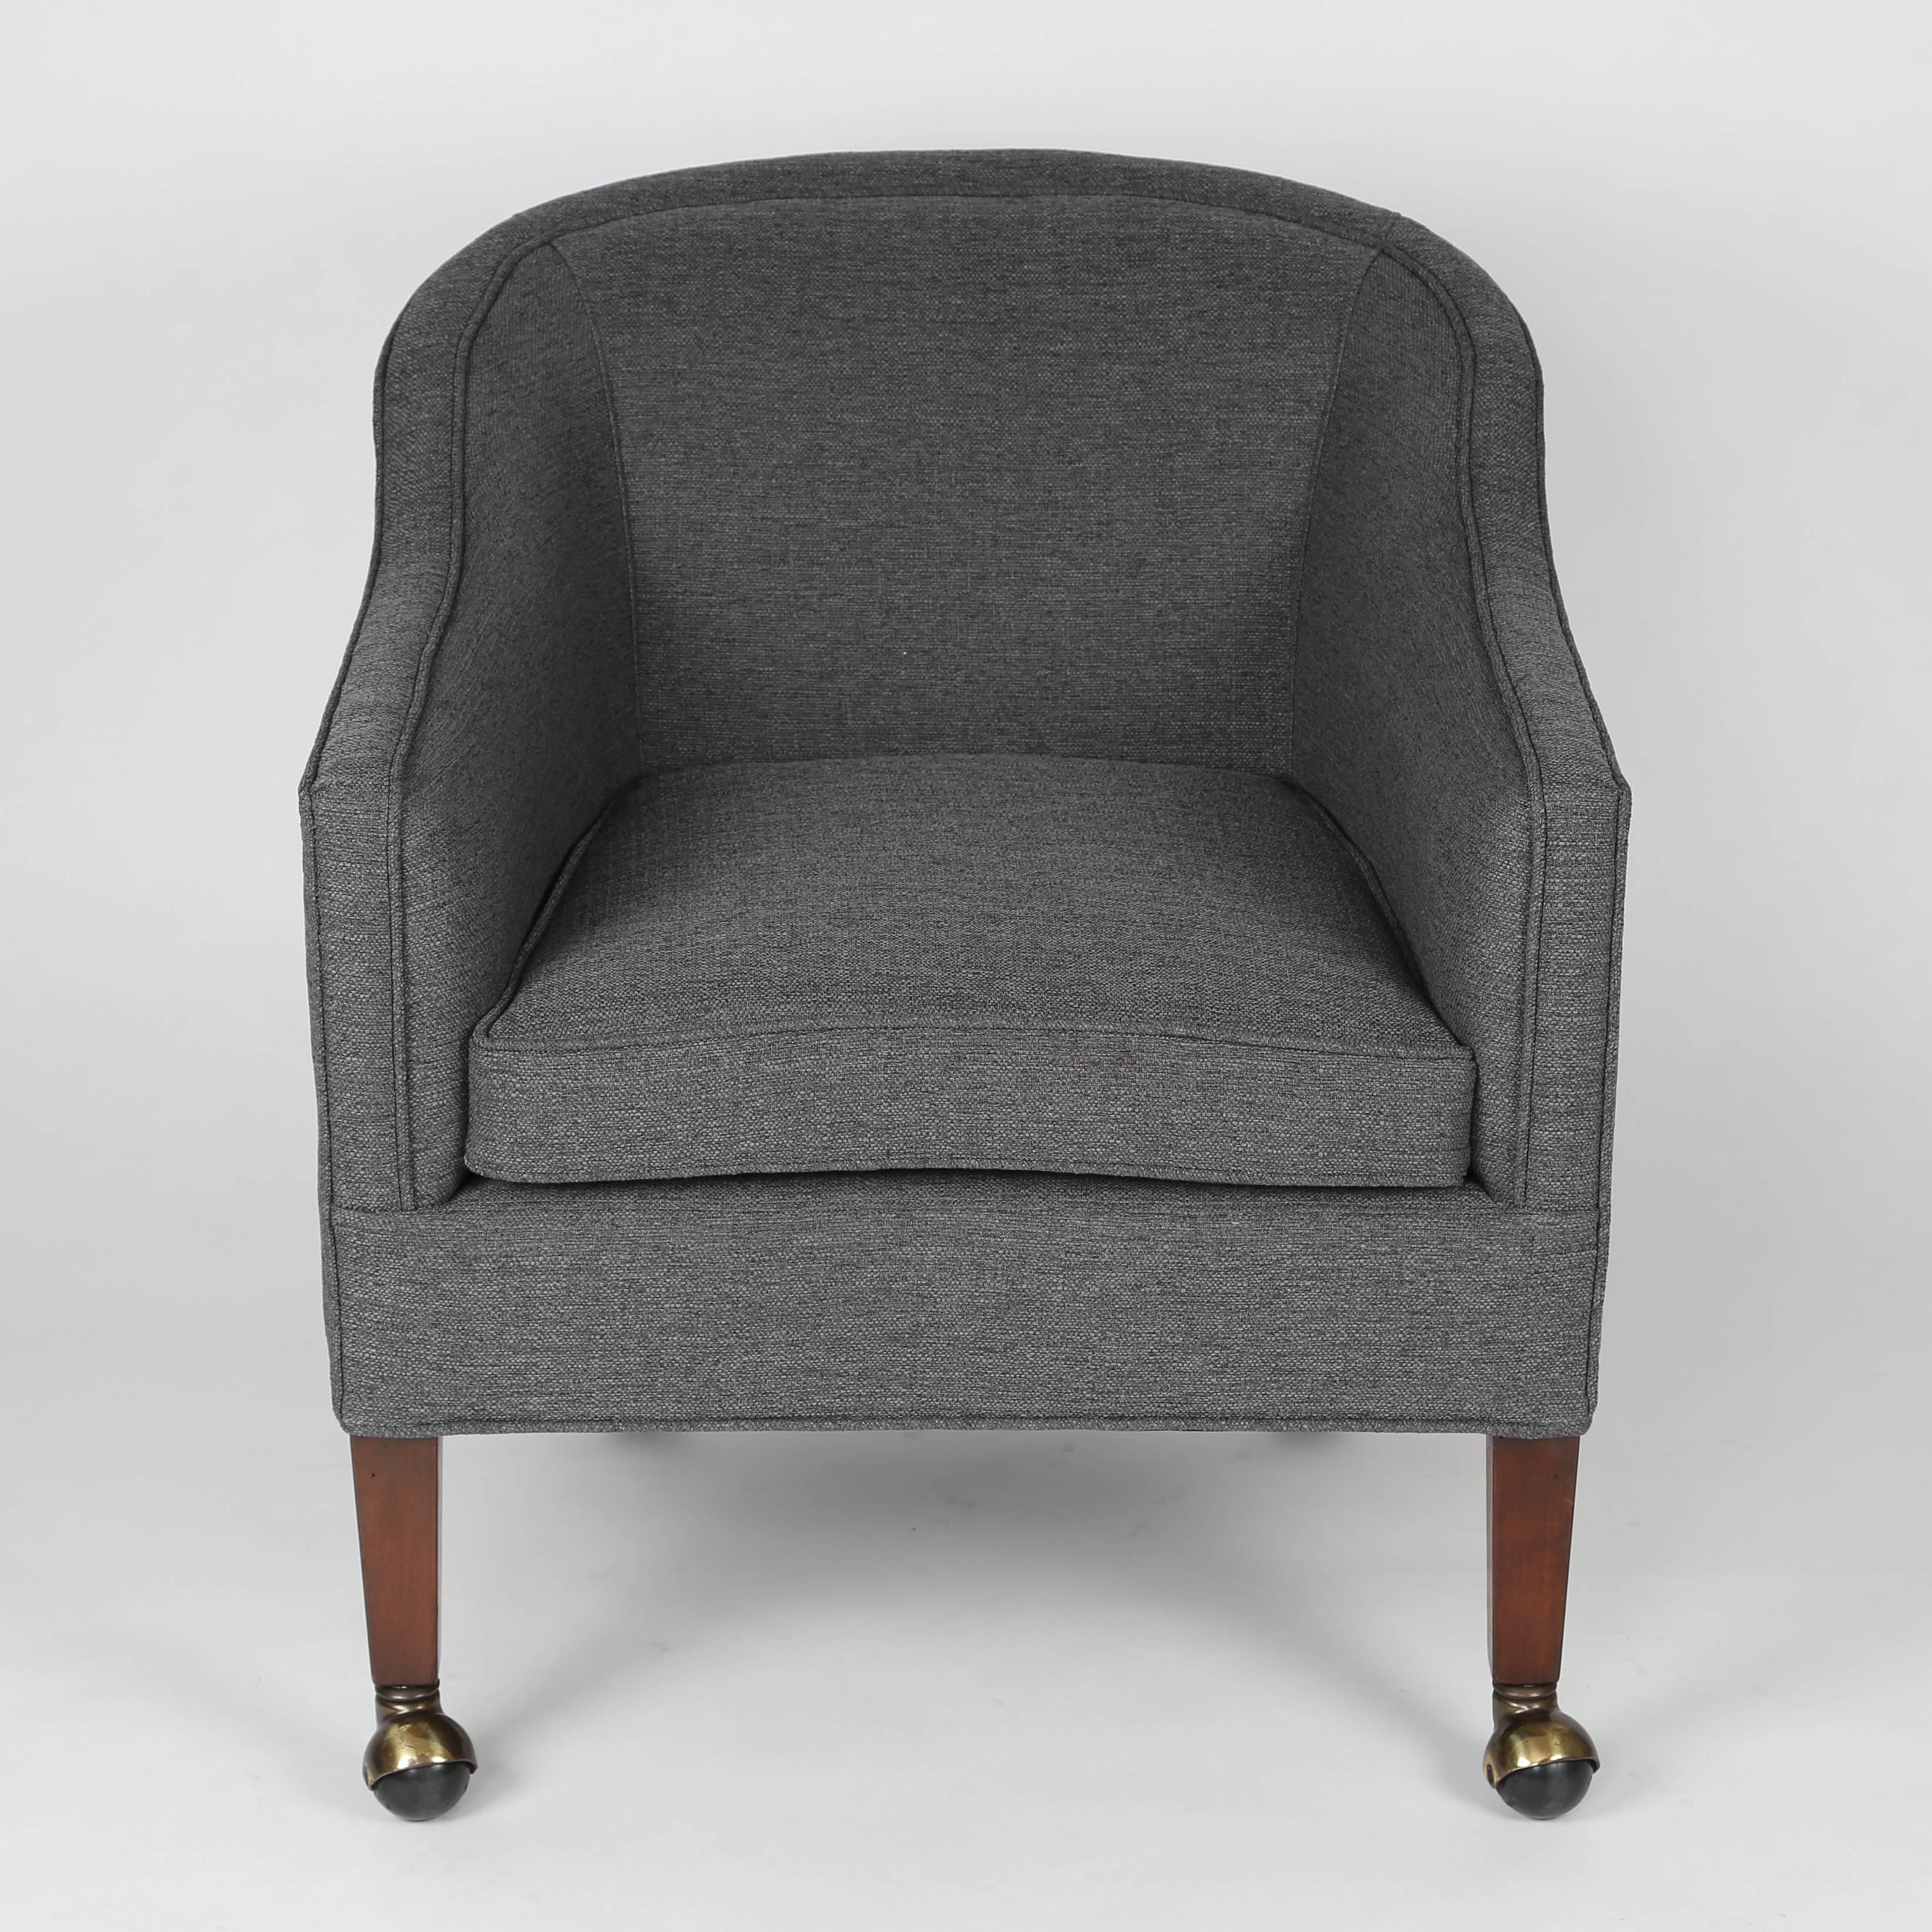 Well made lounge chairs with a loose seat cushion and fully upholstered body, featuring sloped arms that graduate to a rounded back frame. Newly upholstered in grey woven fabric. All four mahogany legs on casters. We don't know who designed these